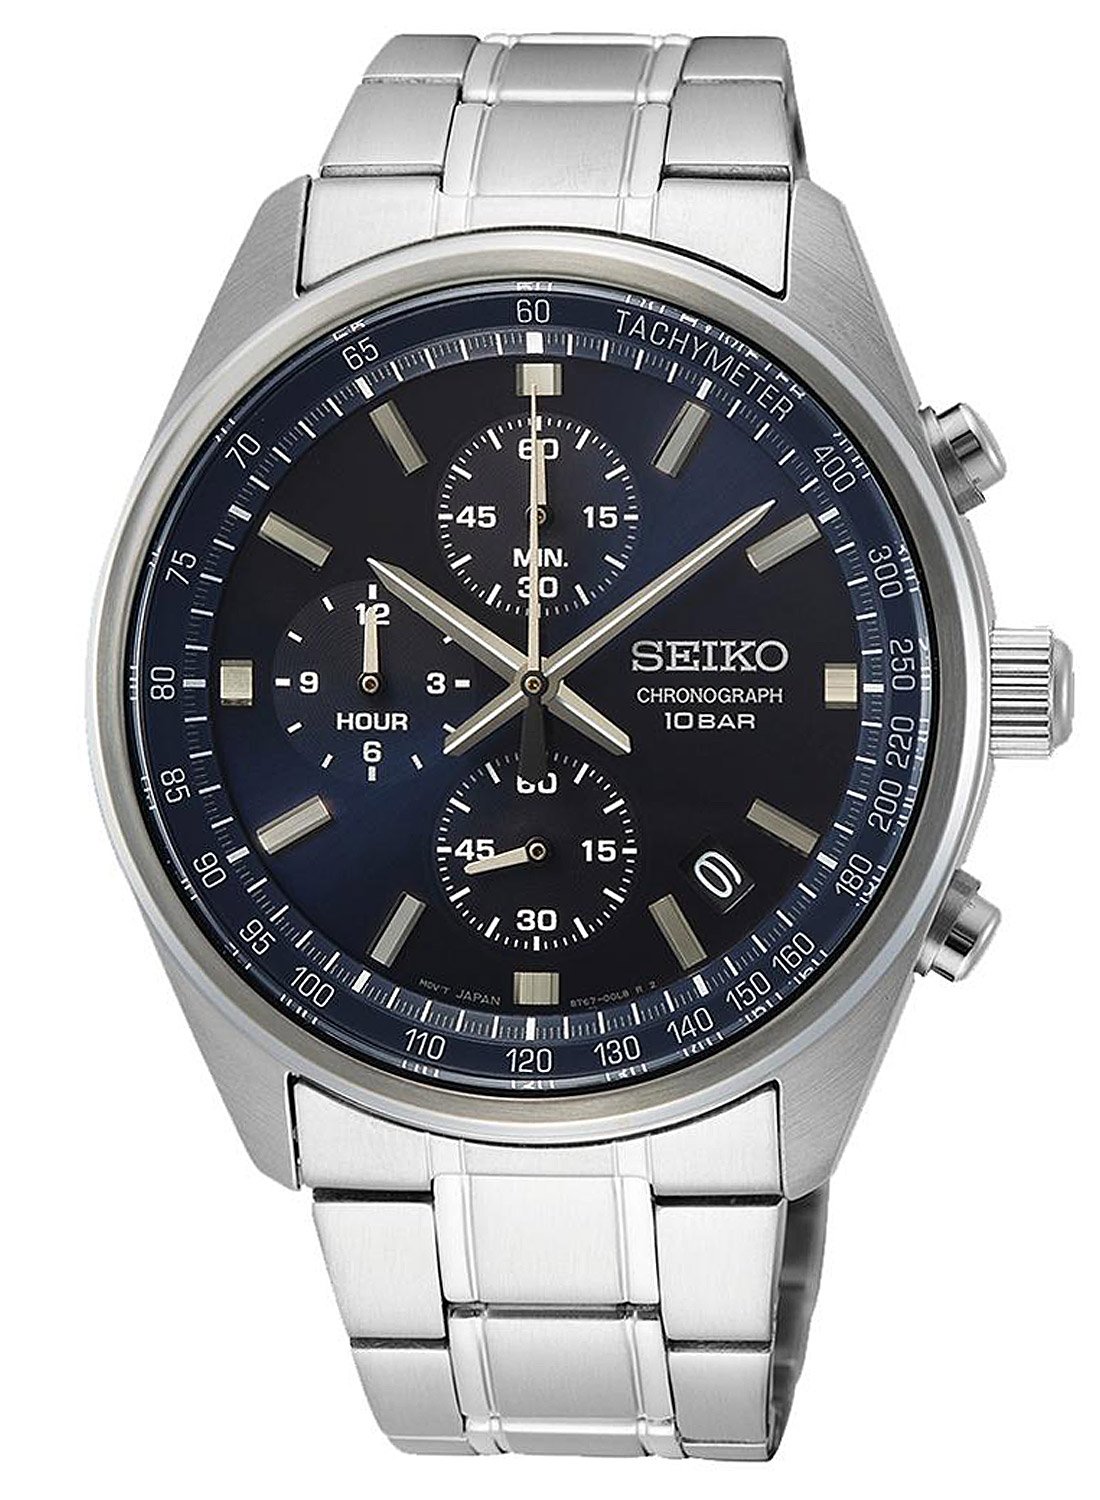 Seiko SSB377P1 Chronograph Men's Watch with Stainless Steel Bracelet